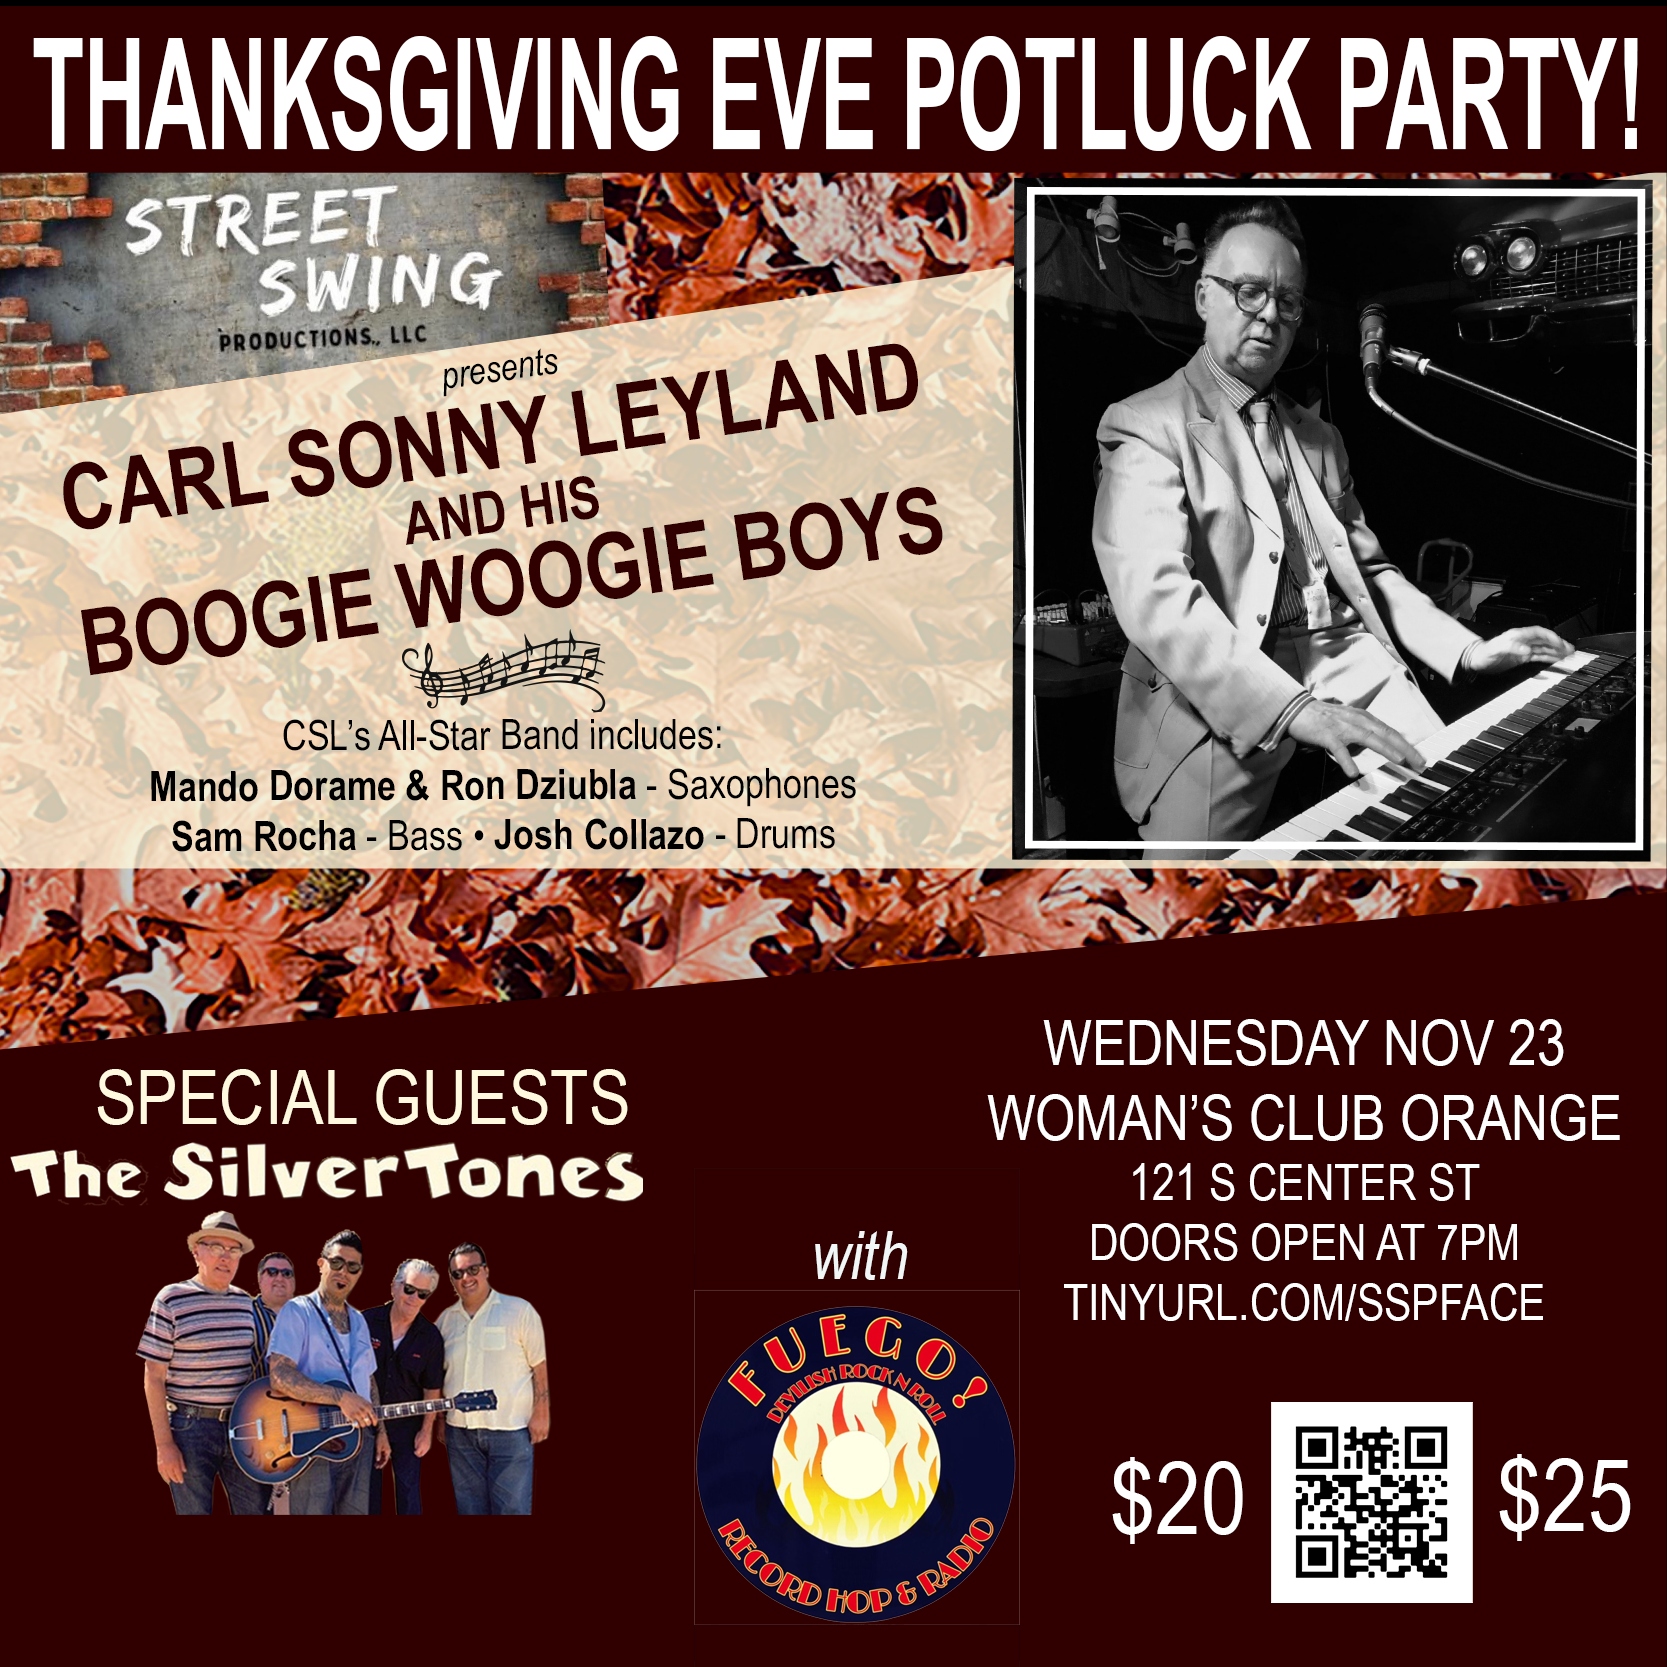 Carl Sonny Leyland’s Thanksgiving Eve Potluck Party!